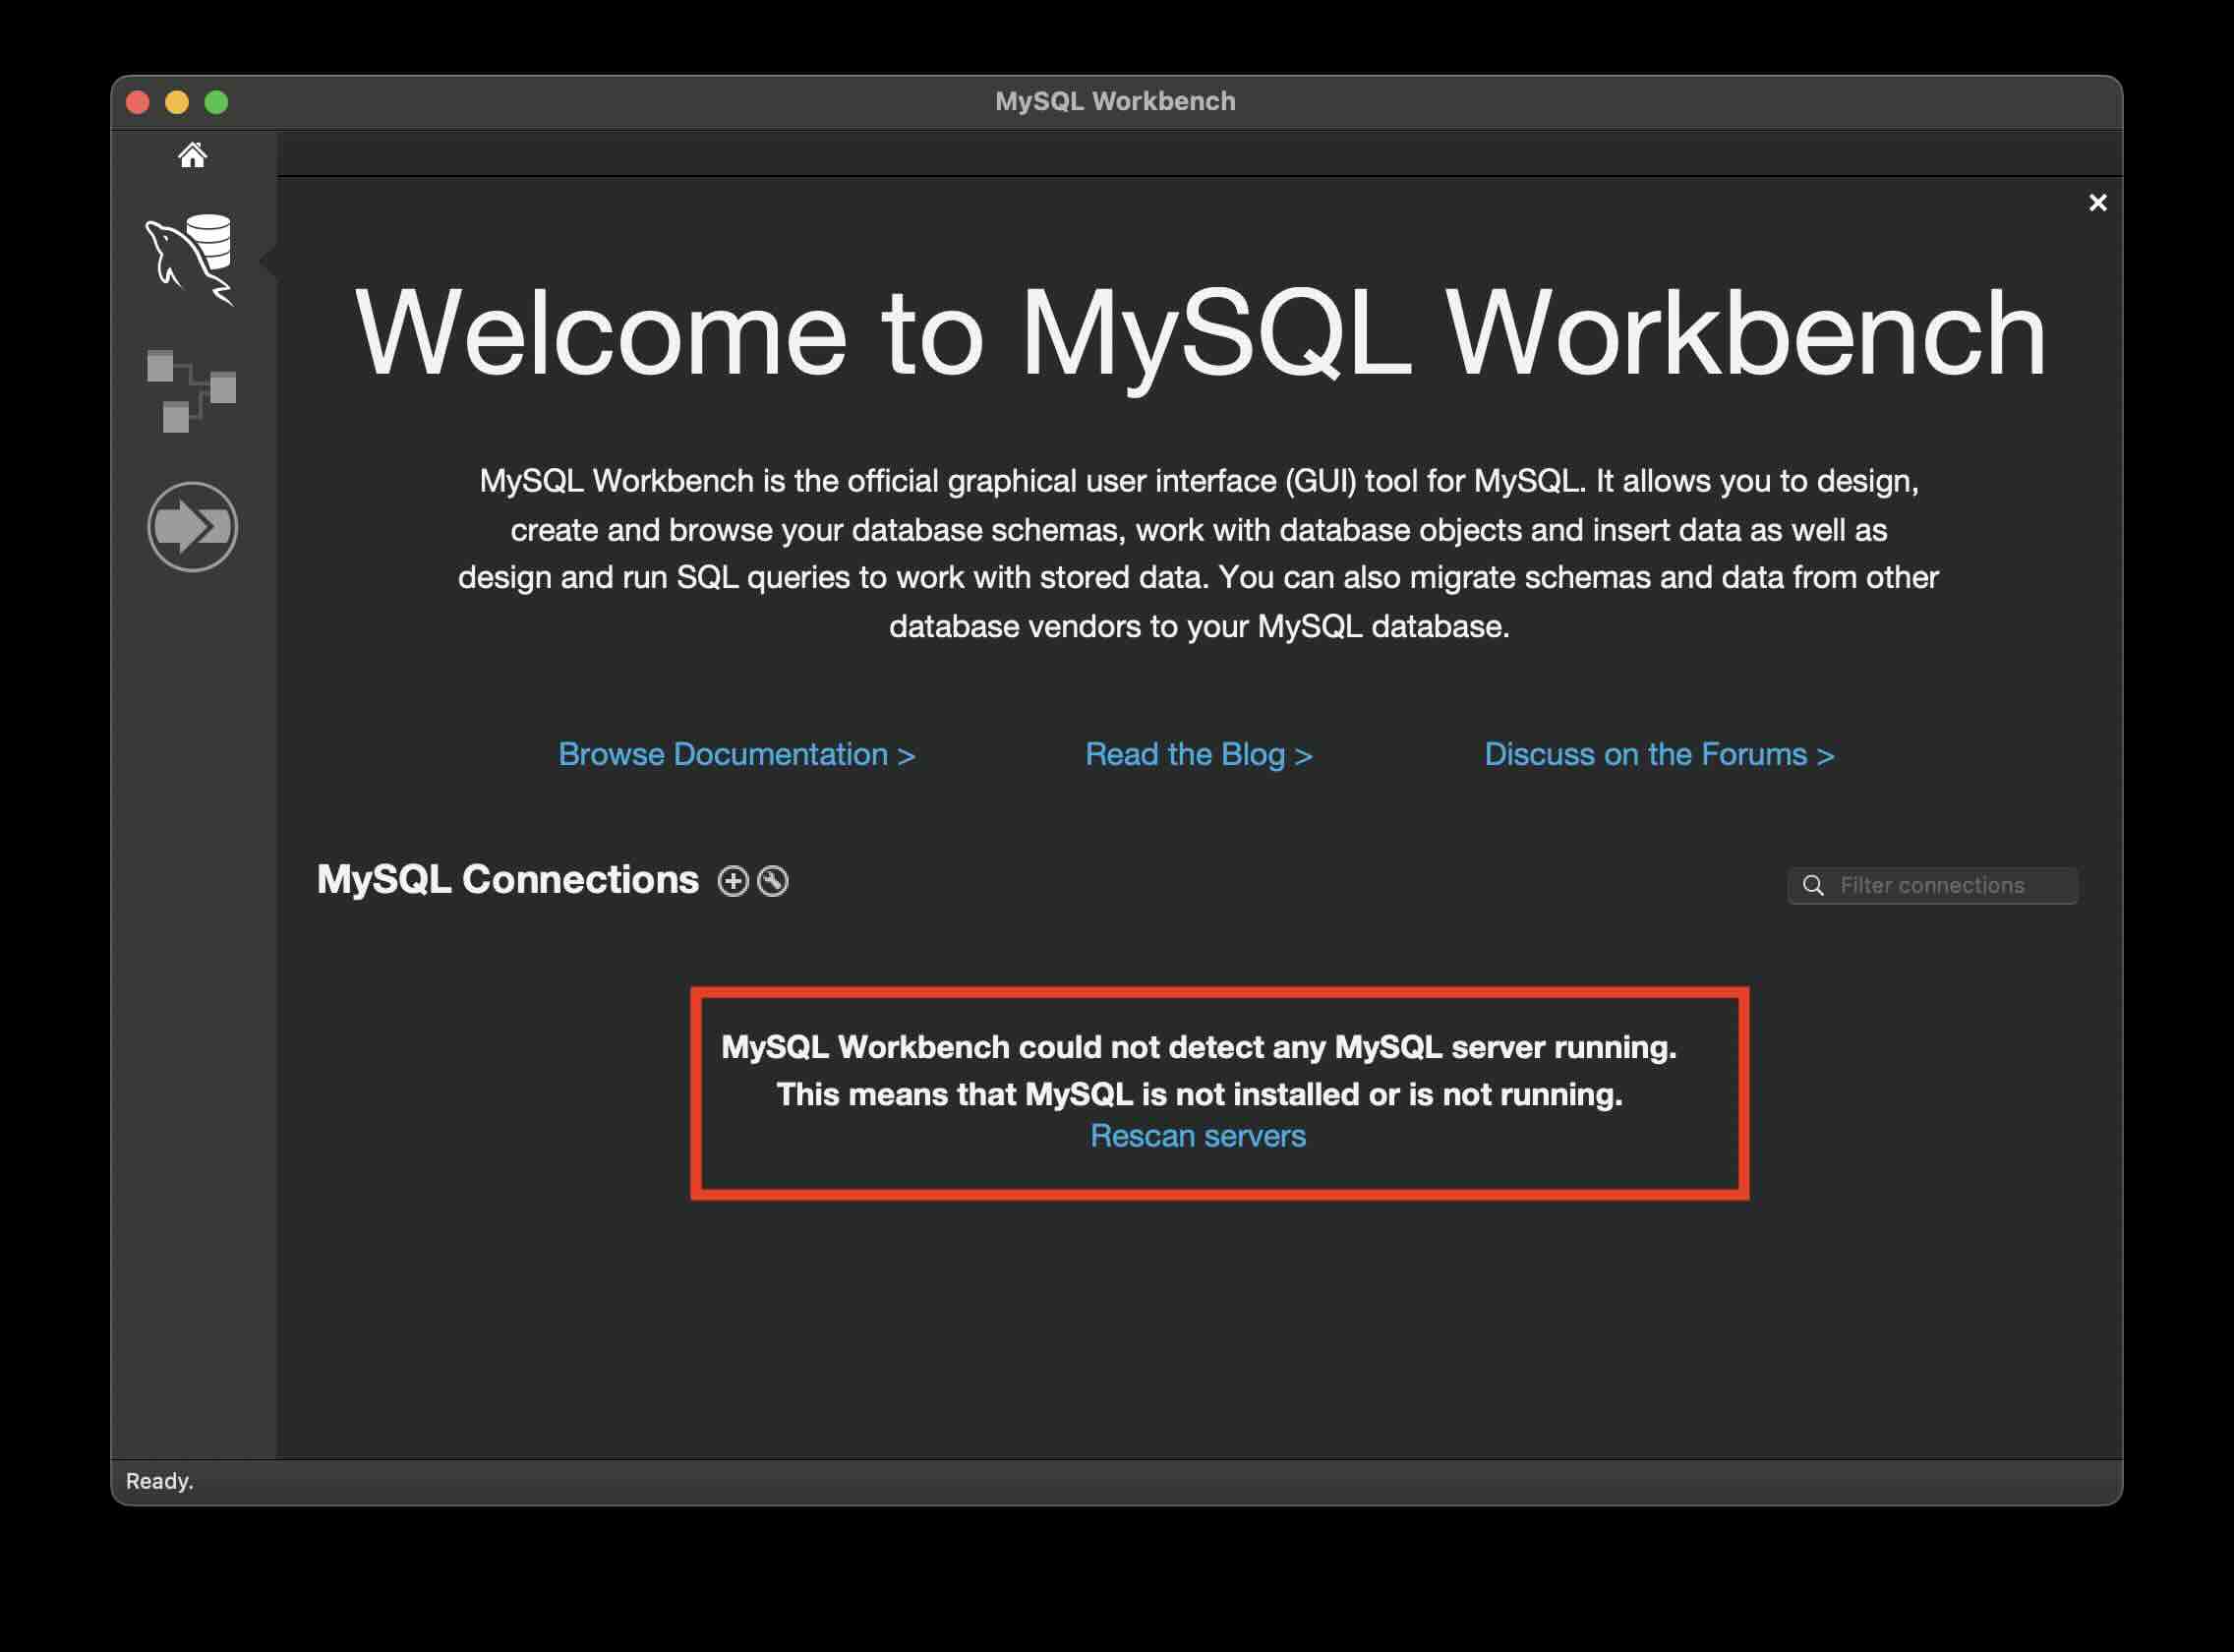 MySQL Workbench could not detect any MySQL server running. This means that MySQL is not installed or is not running